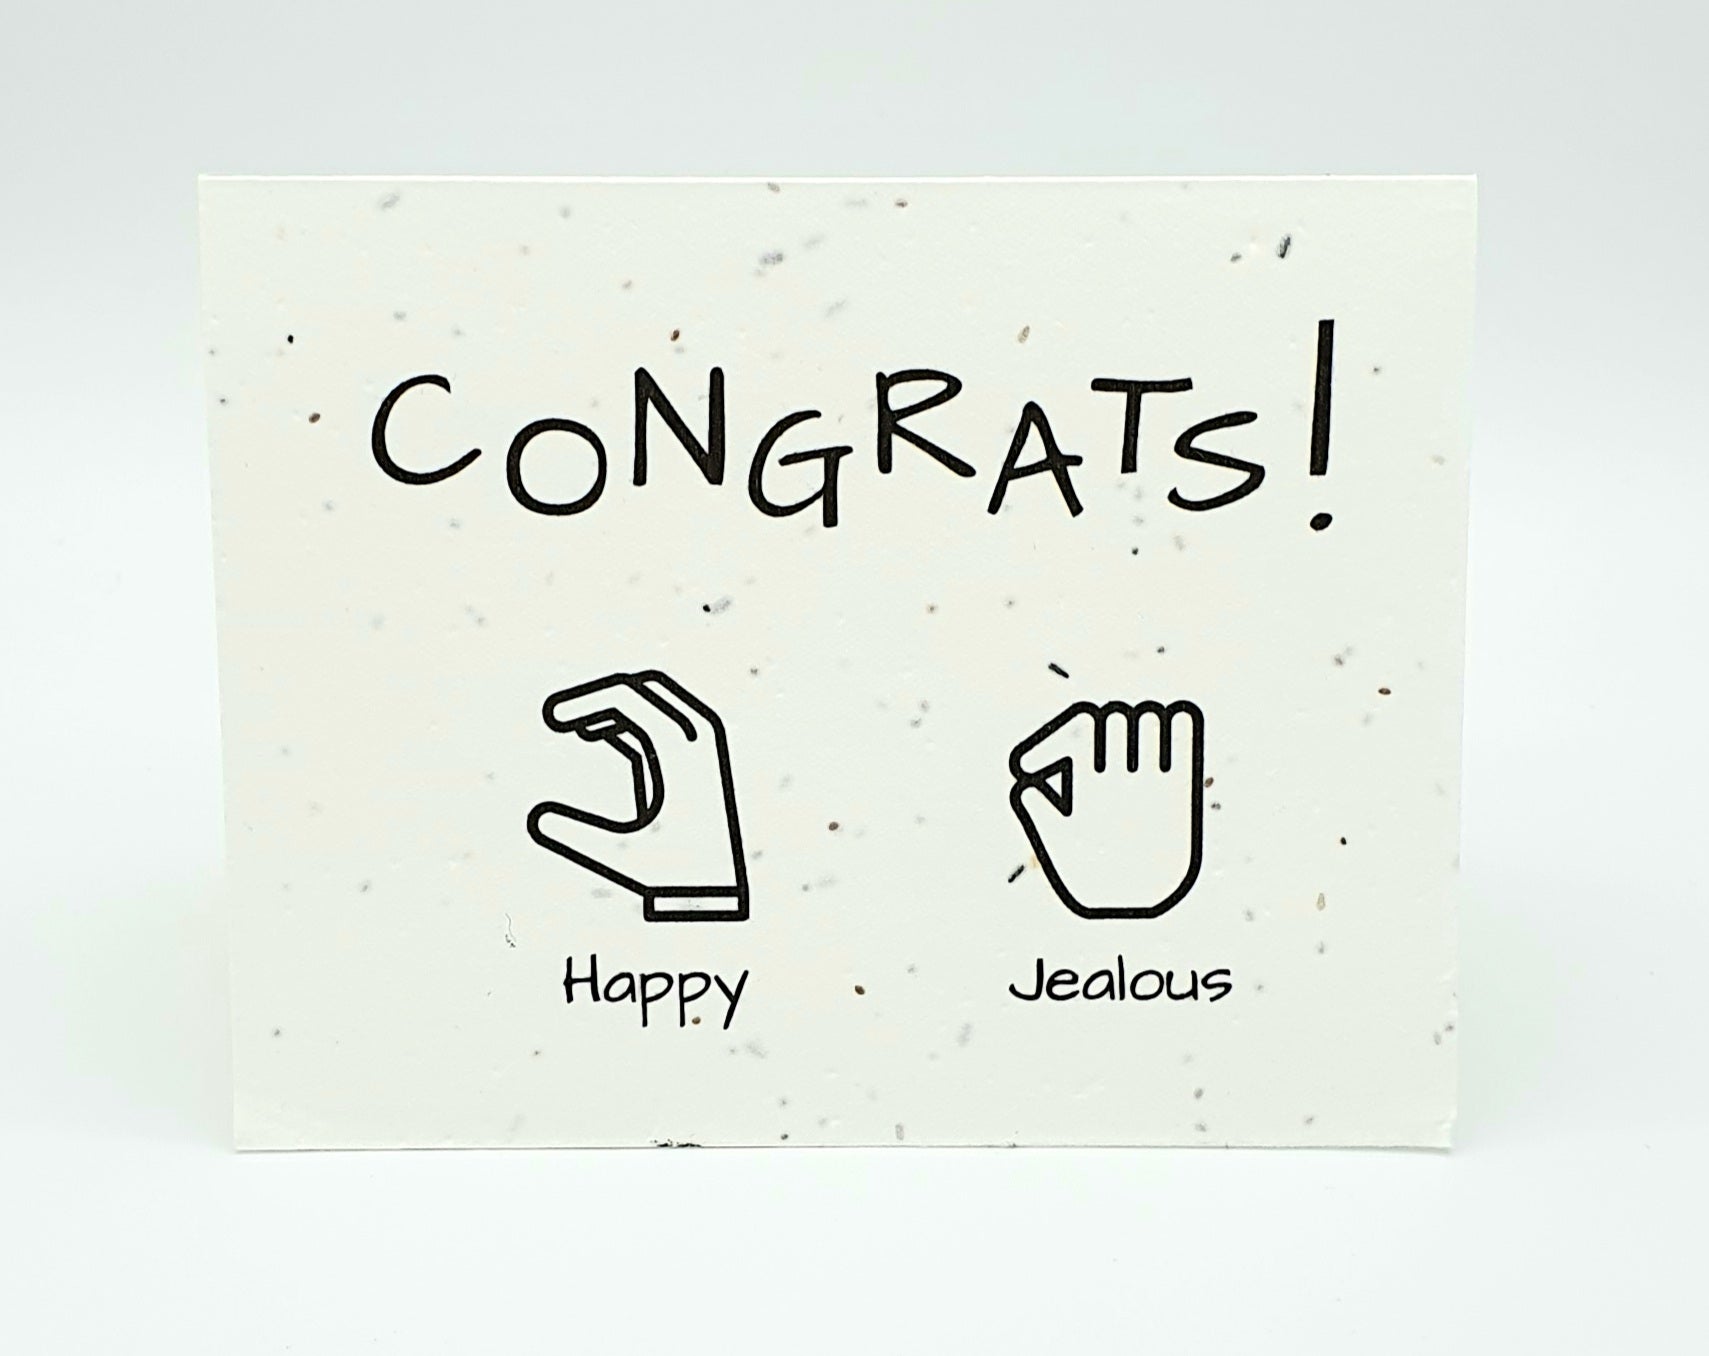 Plantable seed card with "Congrats!" and two hand images - one is "Happy", one is "Jealous".